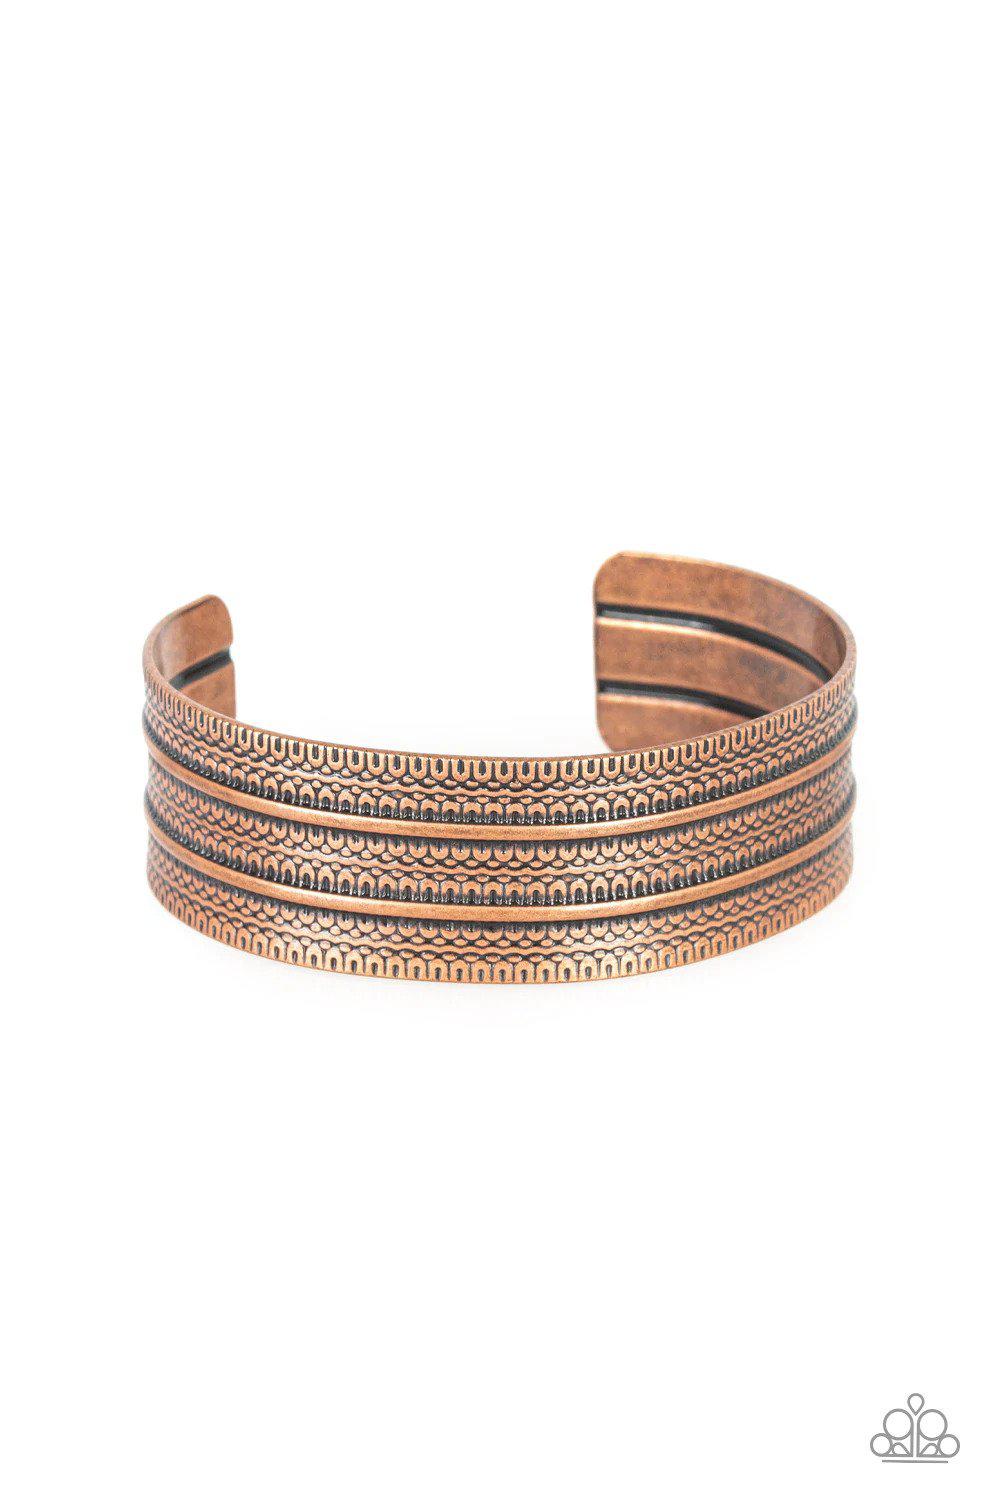 Absolute Amazon Copper Bracelet - Paparazzi Accessories- lightbox - CarasShop.com - $5 Jewelry by Cara Jewels